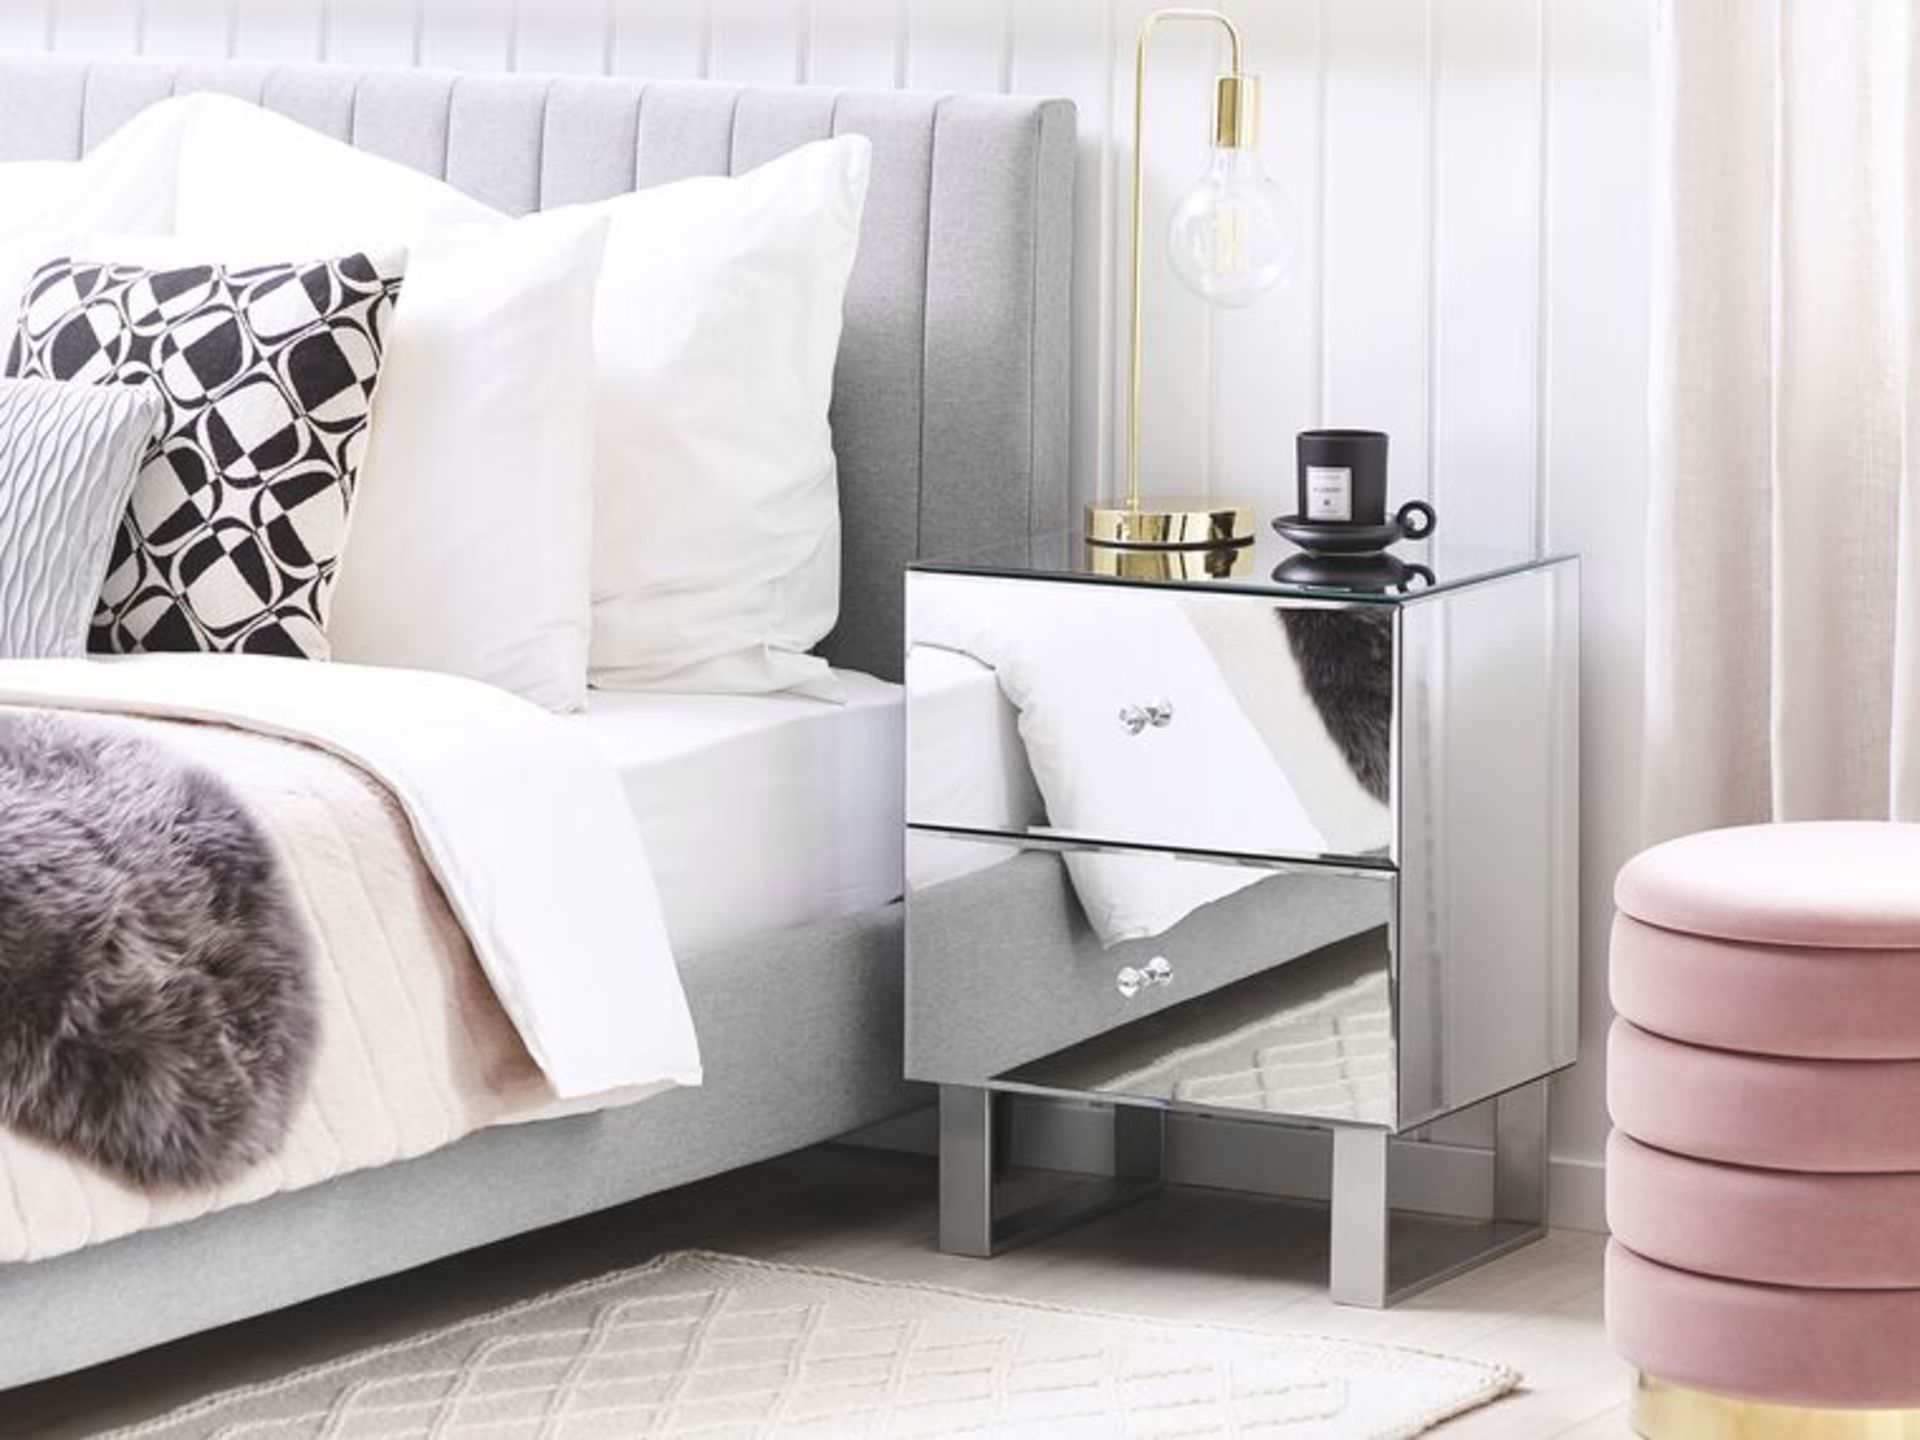 Nesle 2 Drawer Mirrored Bedside Table. - R13a.9. RRP £399.99. Introduce a glam vibe to your - Bild 2 aus 2